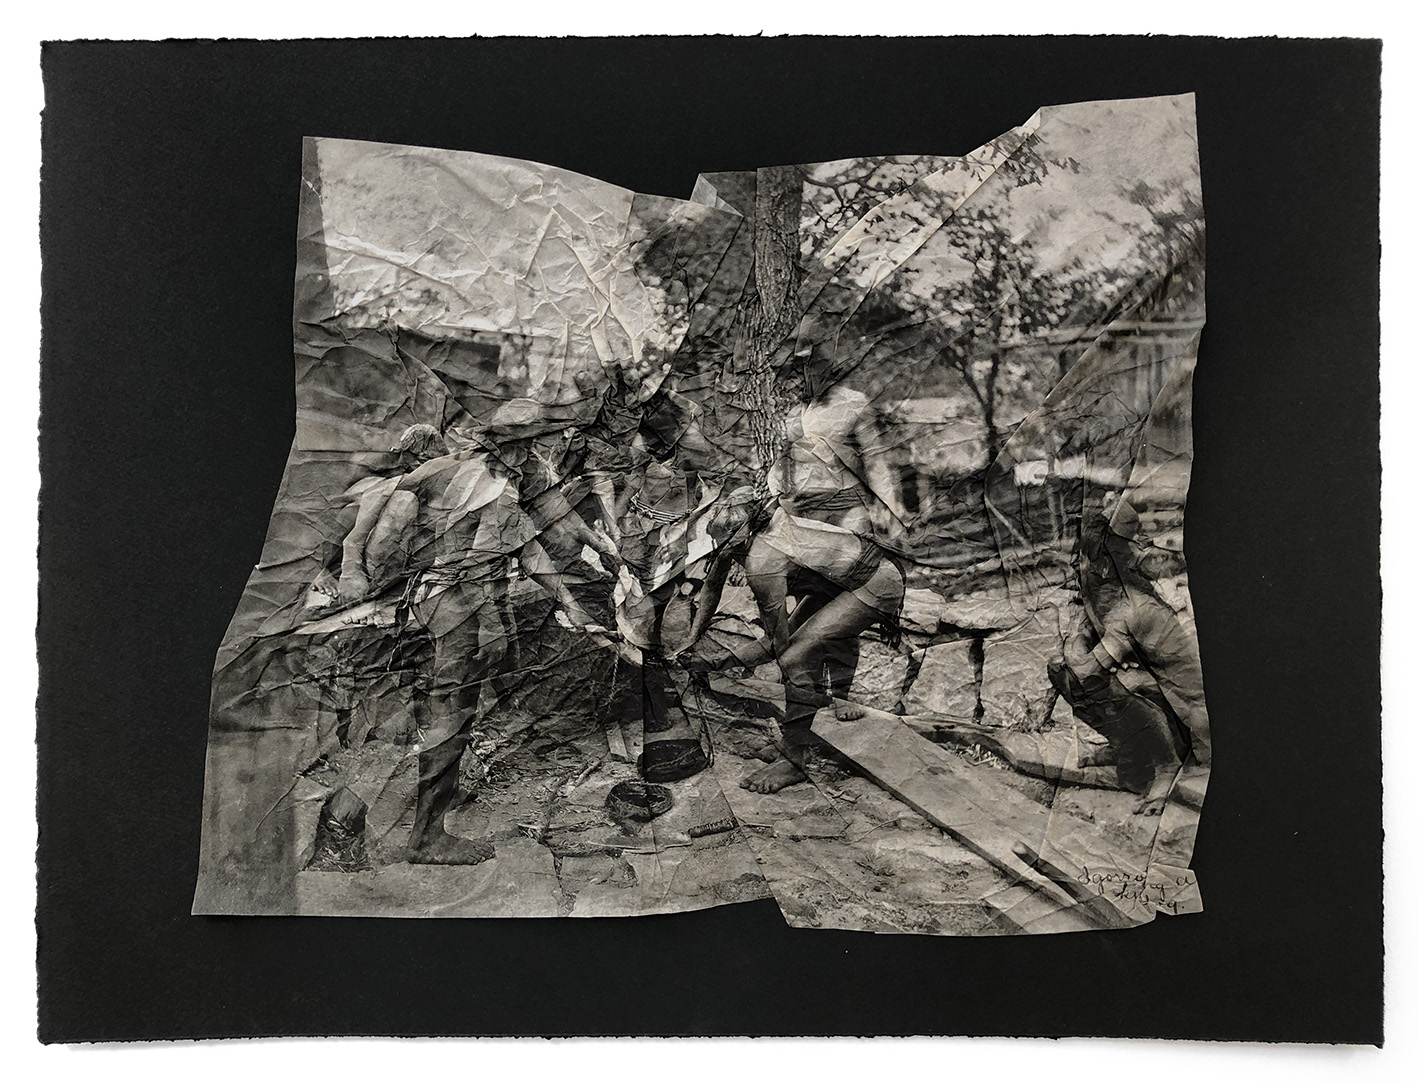 A crumpled print of an photo of people in a rural scene